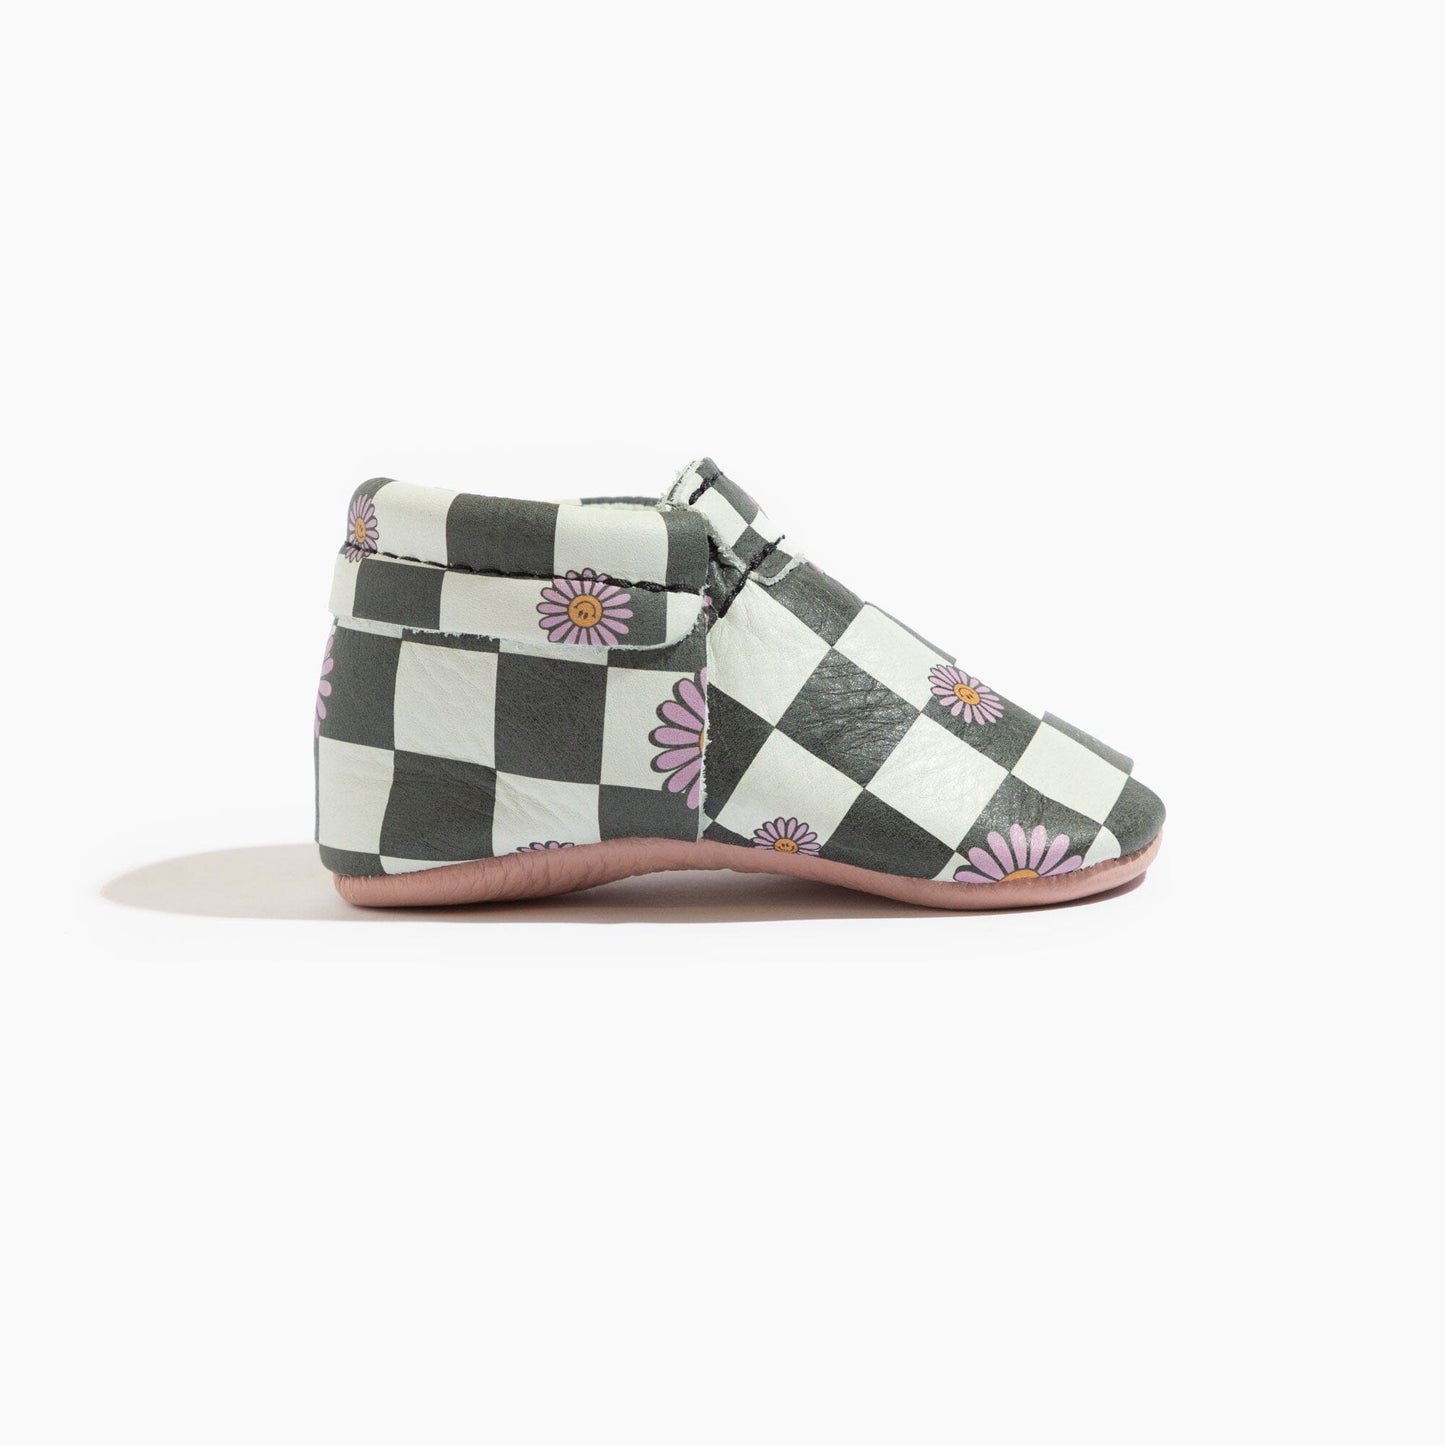 Flower Power Check City Baby Shoe City Mocc Soft Sole 